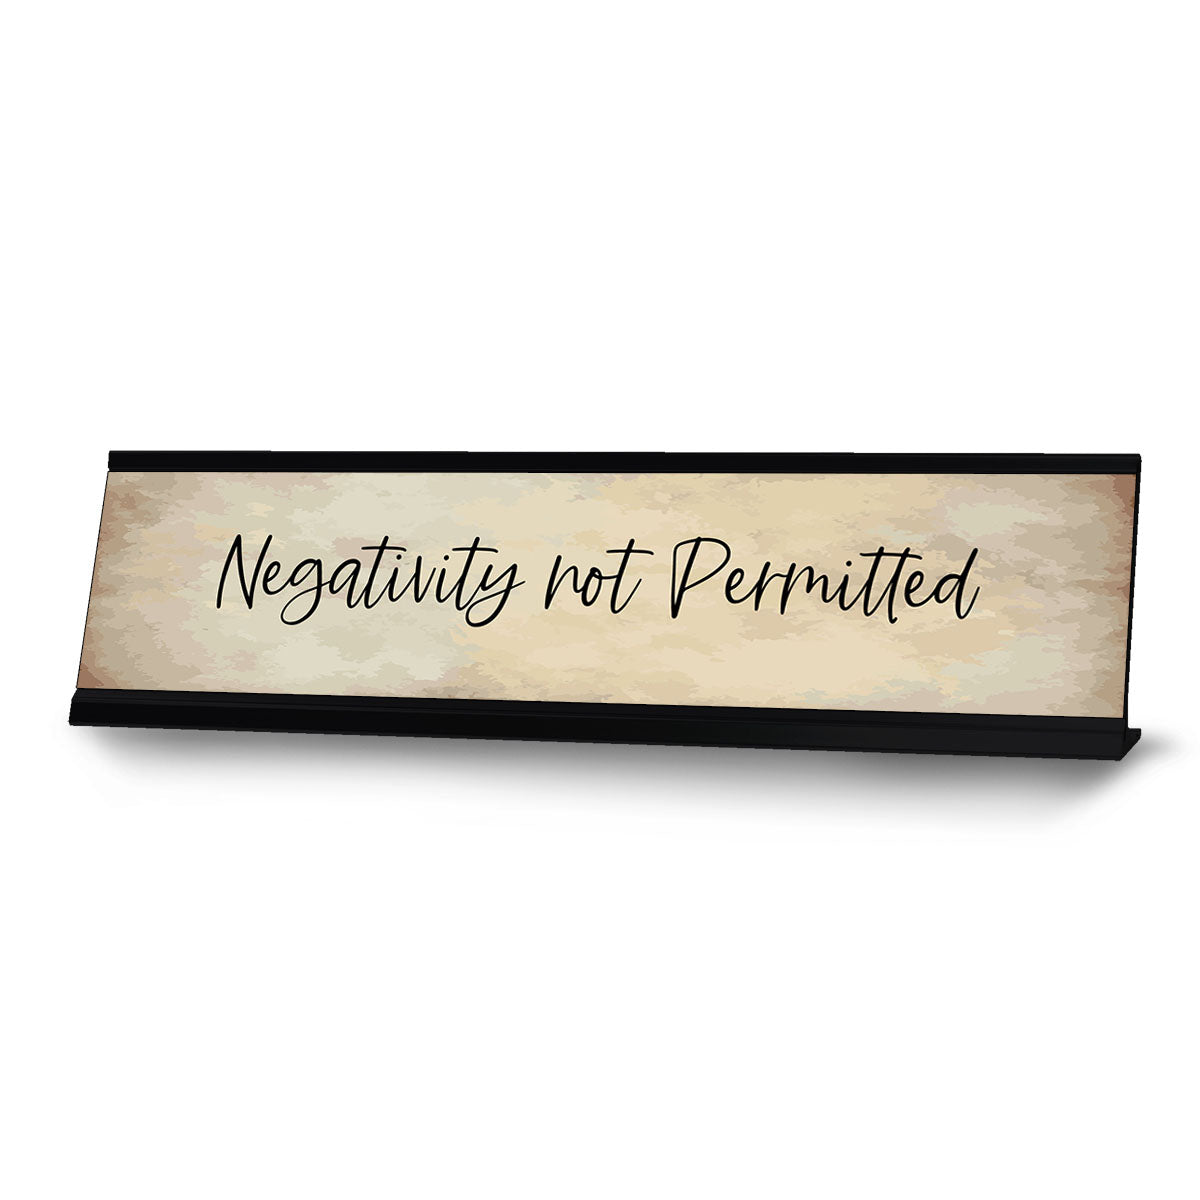 Negativity not Permitted, Motivational Desk Sign (2 x 8")